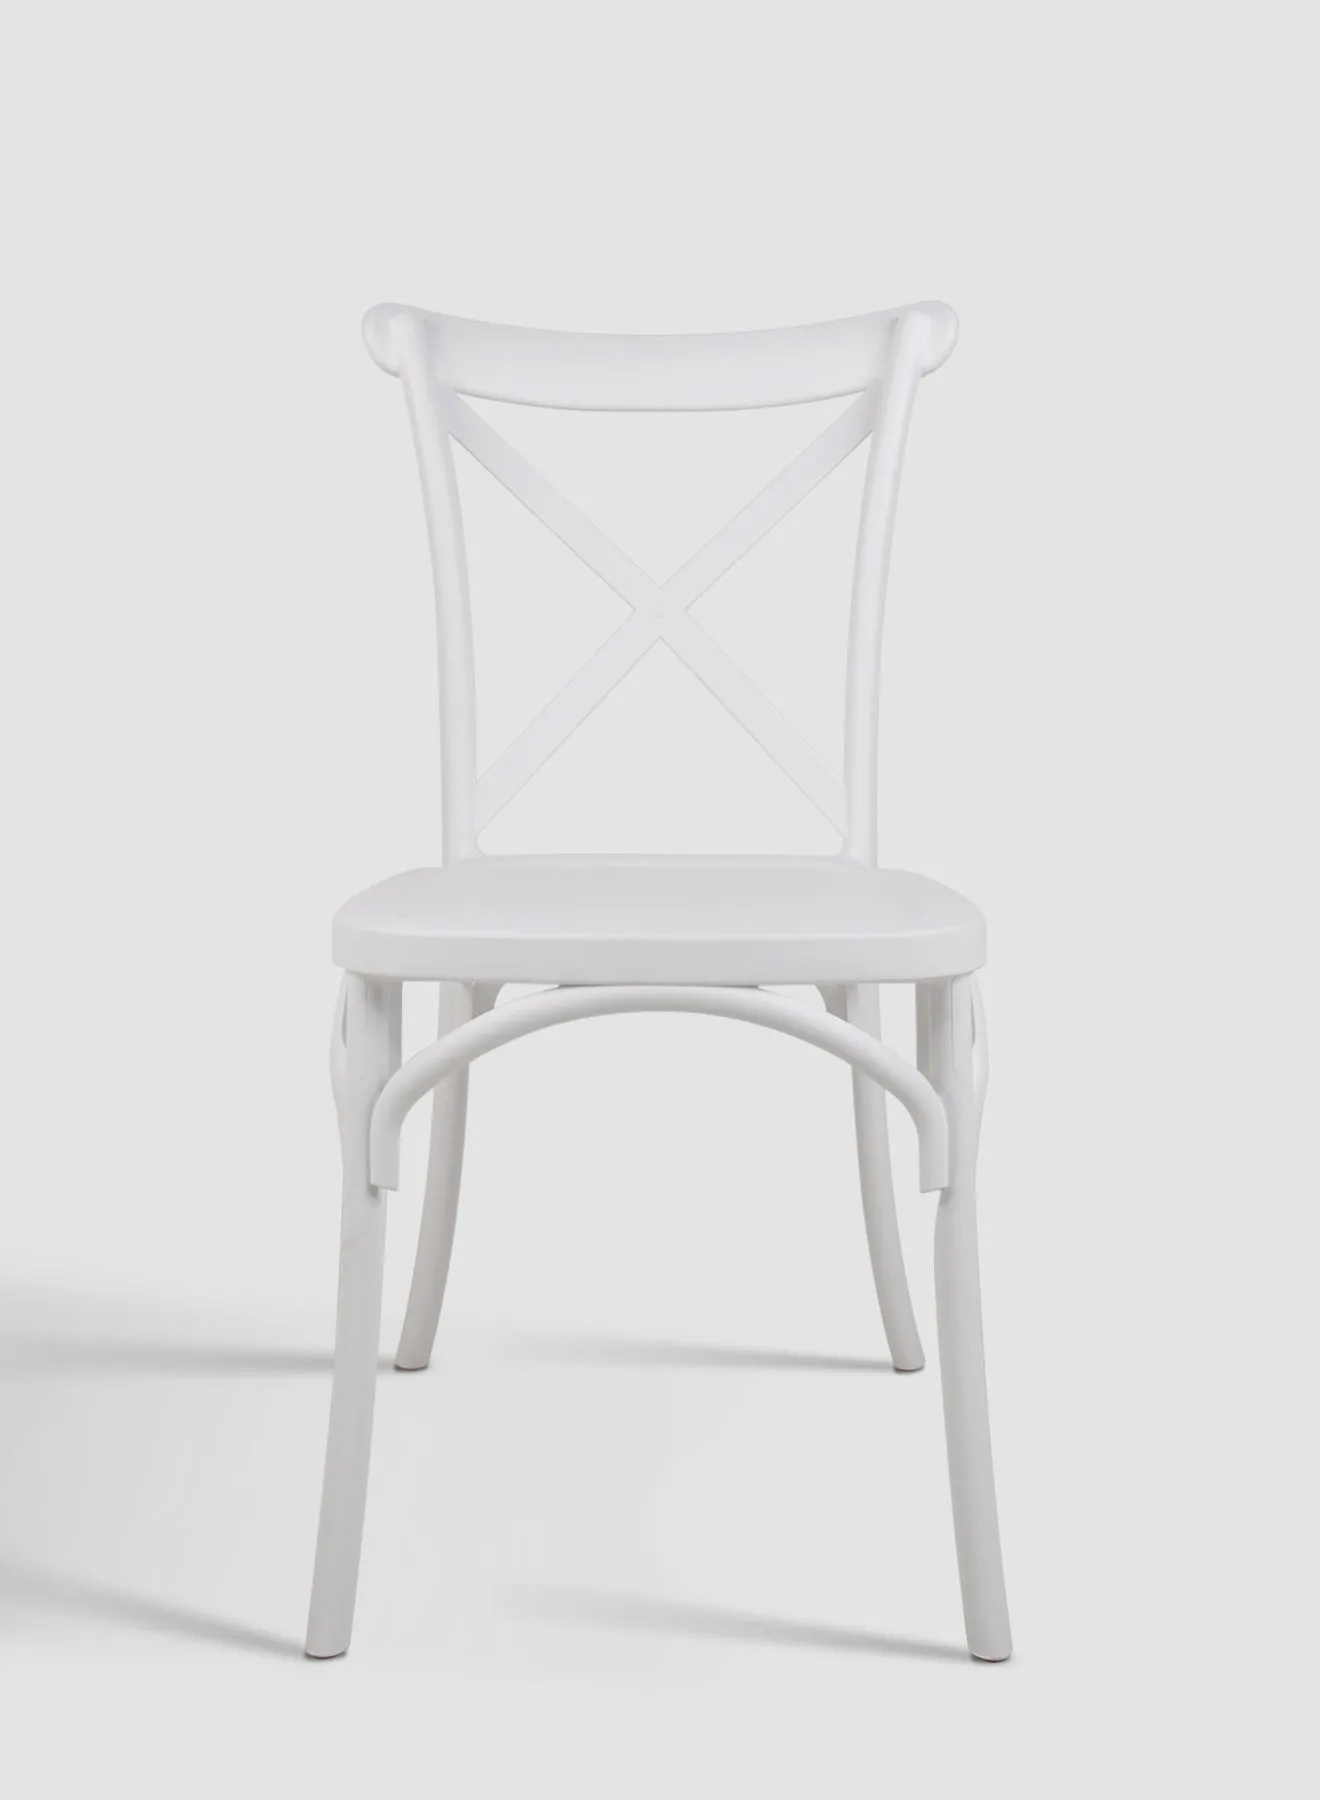 ebb & flow Dining Chair Luxurious - In White Plastic Chair Size 54 X 51 X 92.5cm